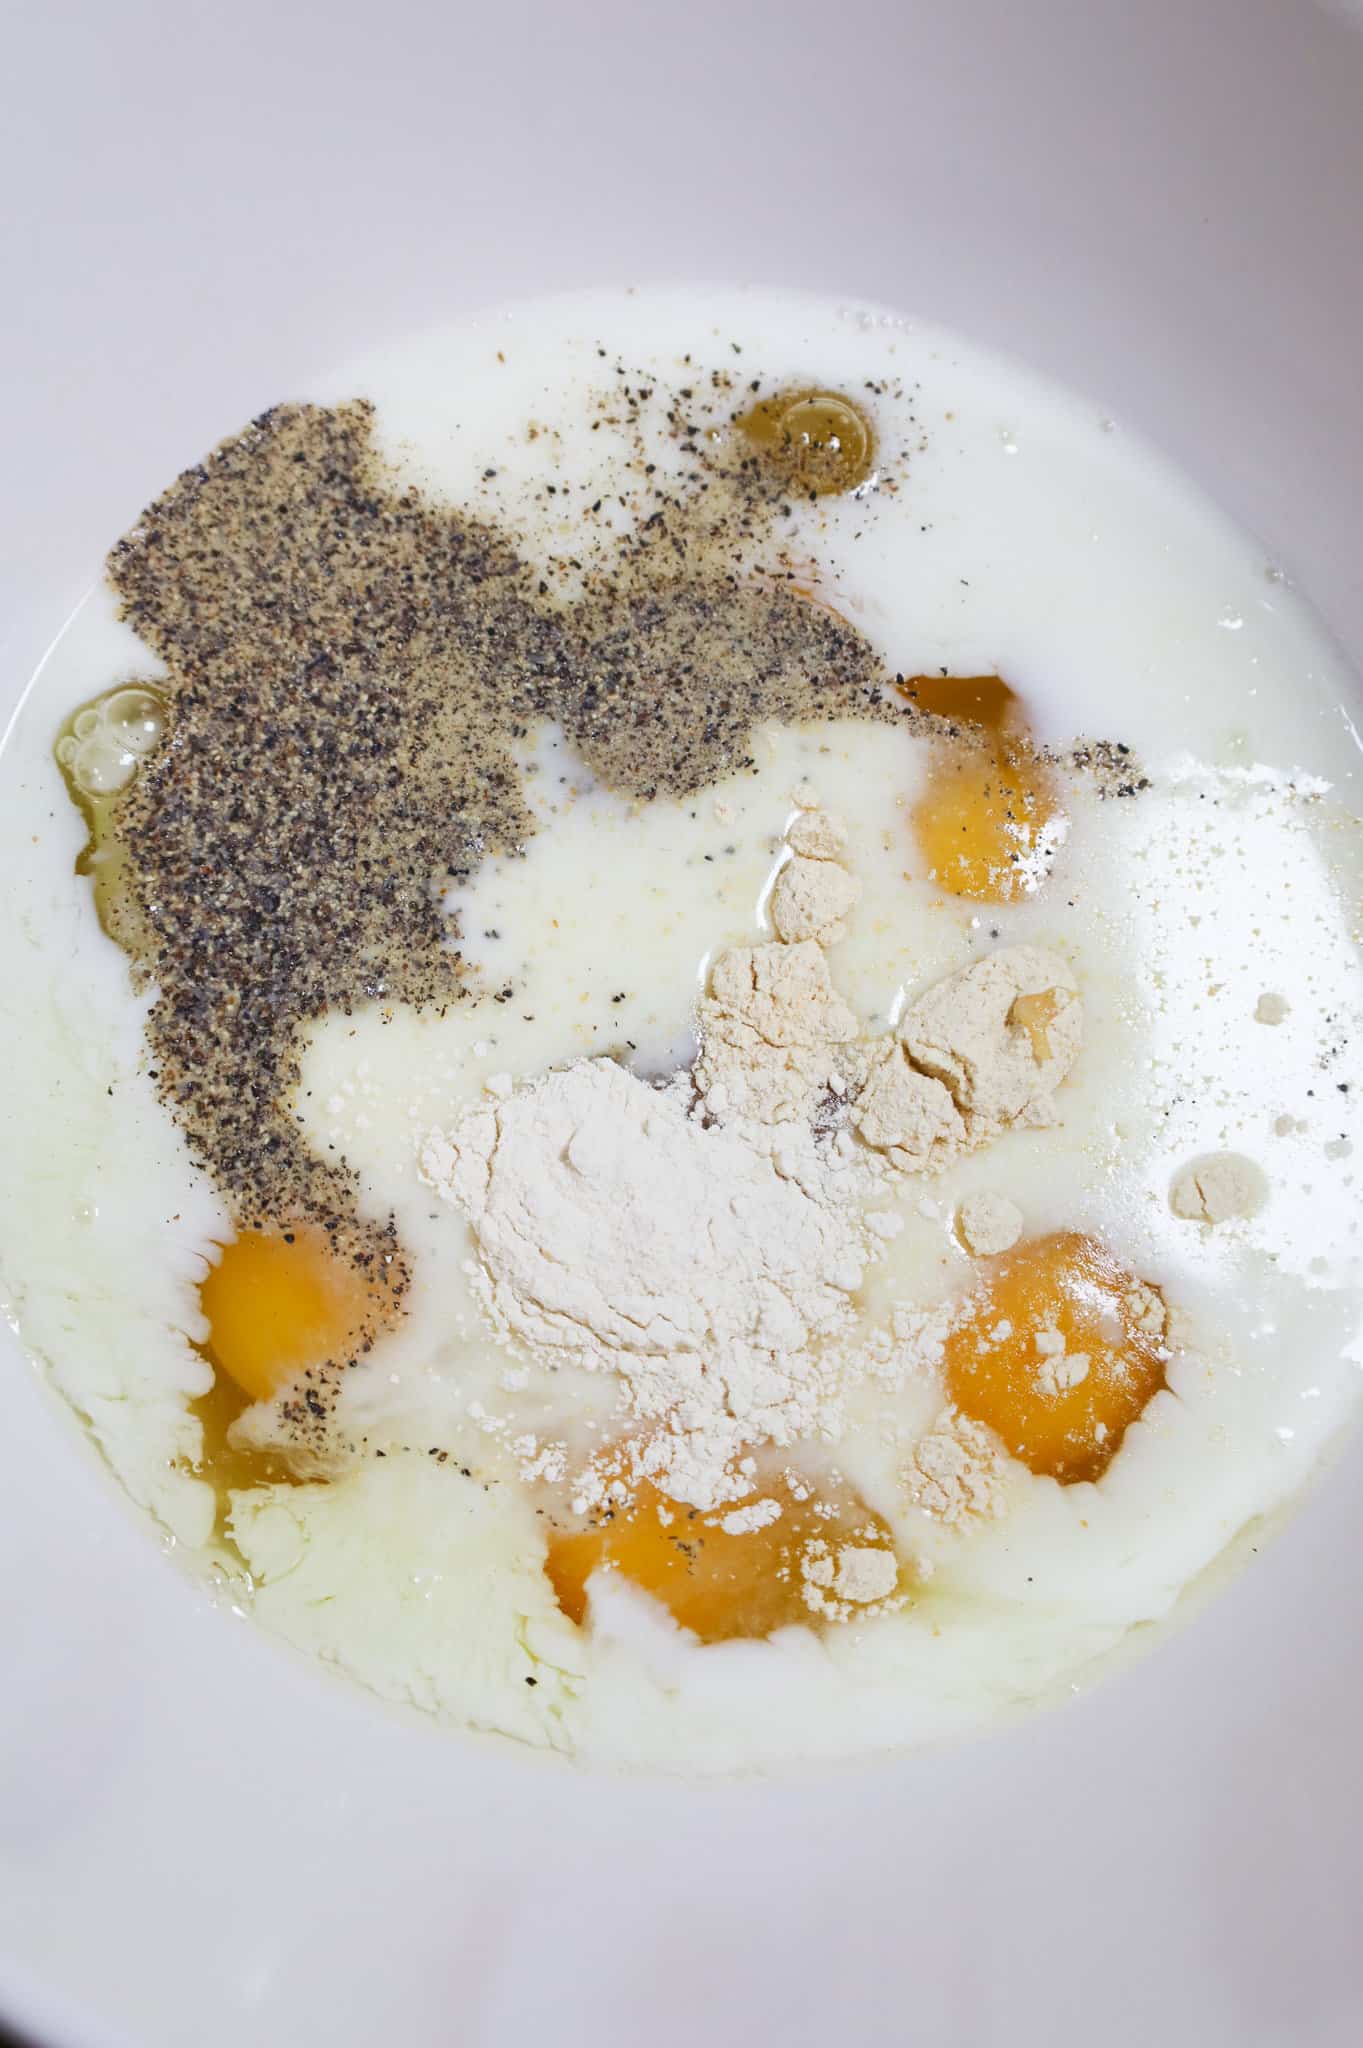 spices, milk and eggs in a mixing bowl